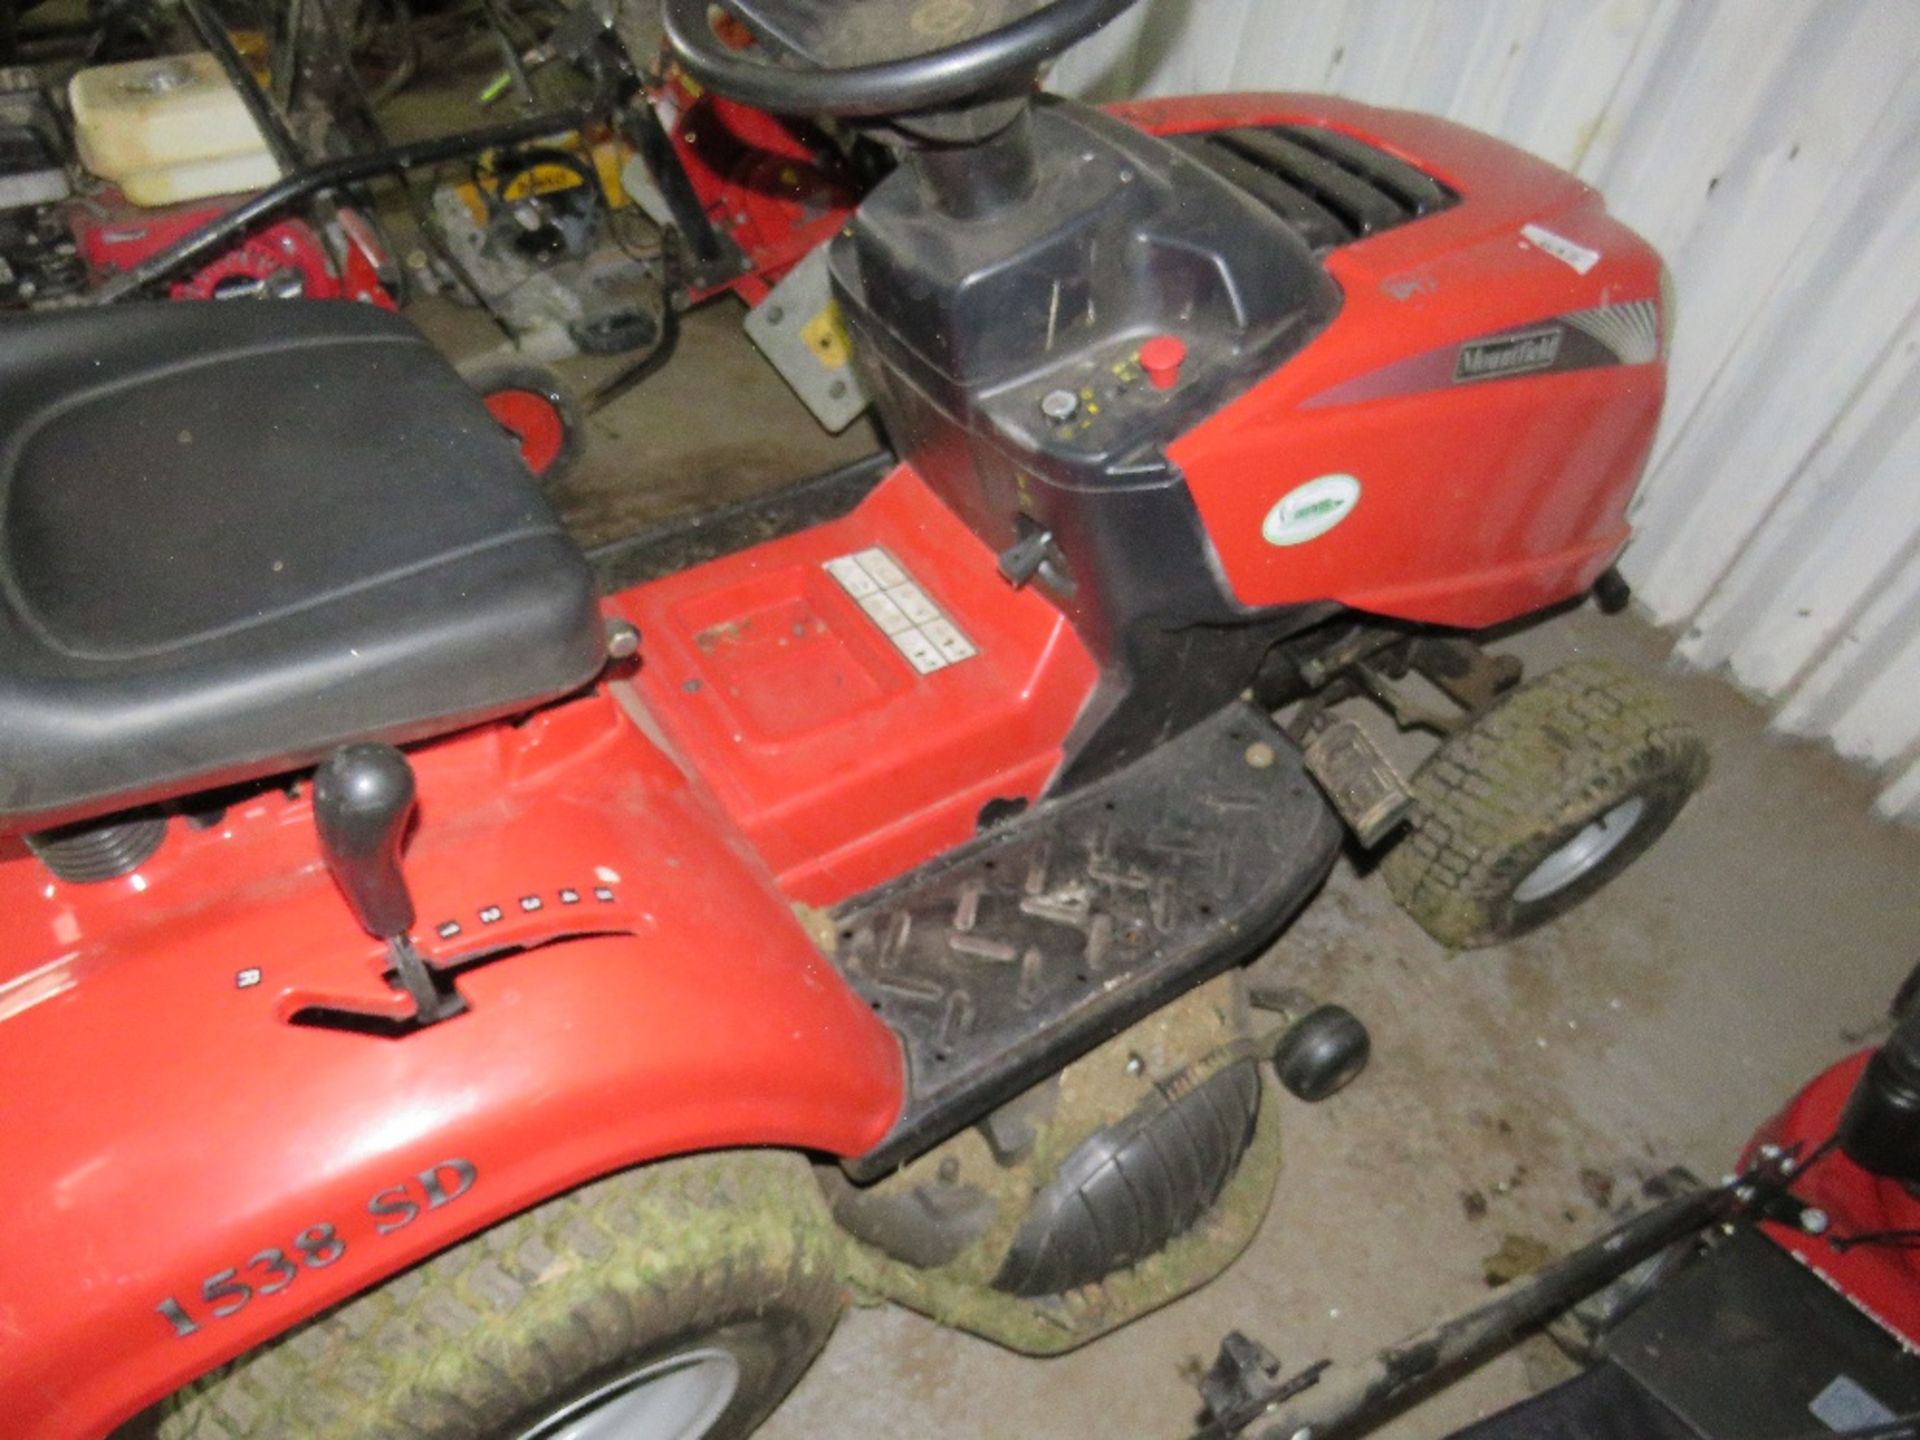 MOUNTFIELD 1538SD RIDE ON MOWER, YEAR 2012, HYDRASTATIC DRIVE. WHEN TESTED WAS SEEN TO RUN BUT WOULD - Image 5 of 5